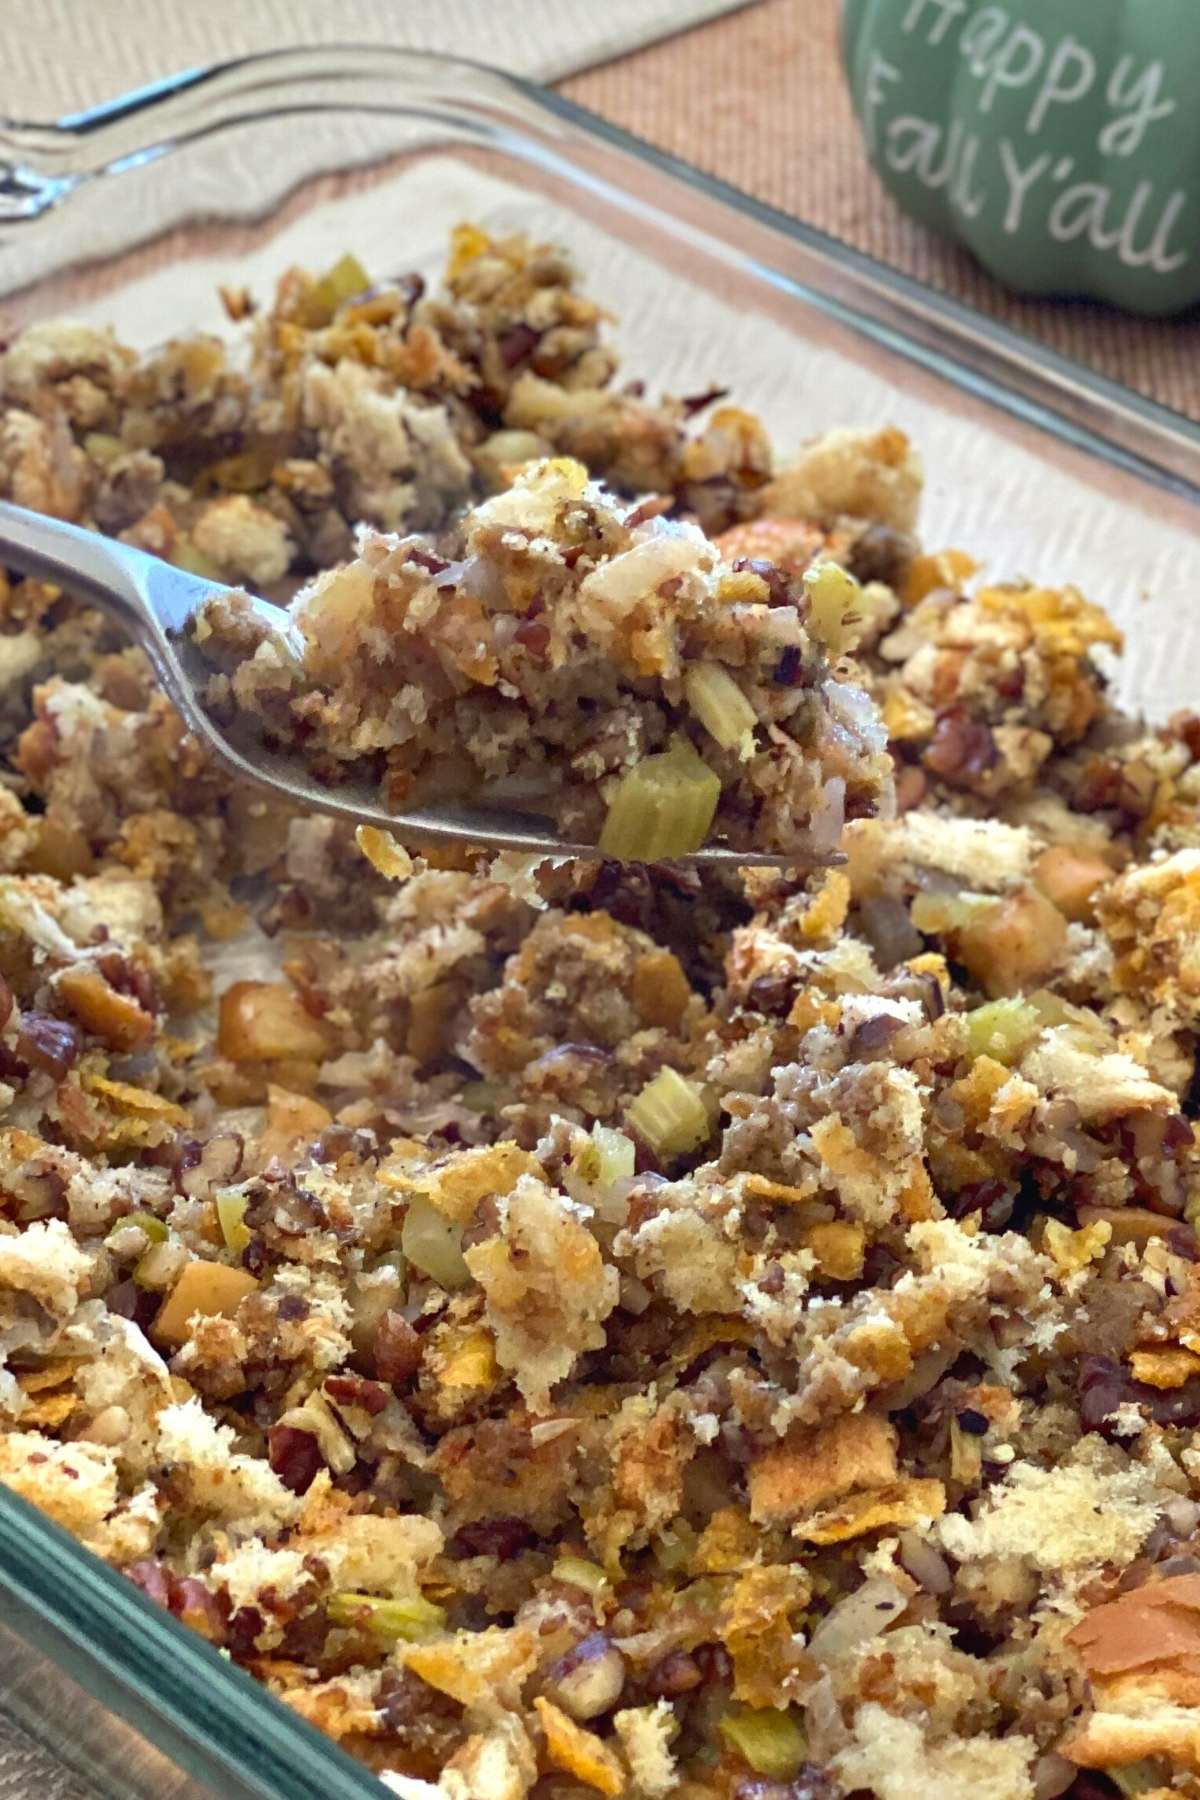 Make-ahead Oven Baked Stuffing made with fresh bread, apples, and pecans, in a casserole dish.